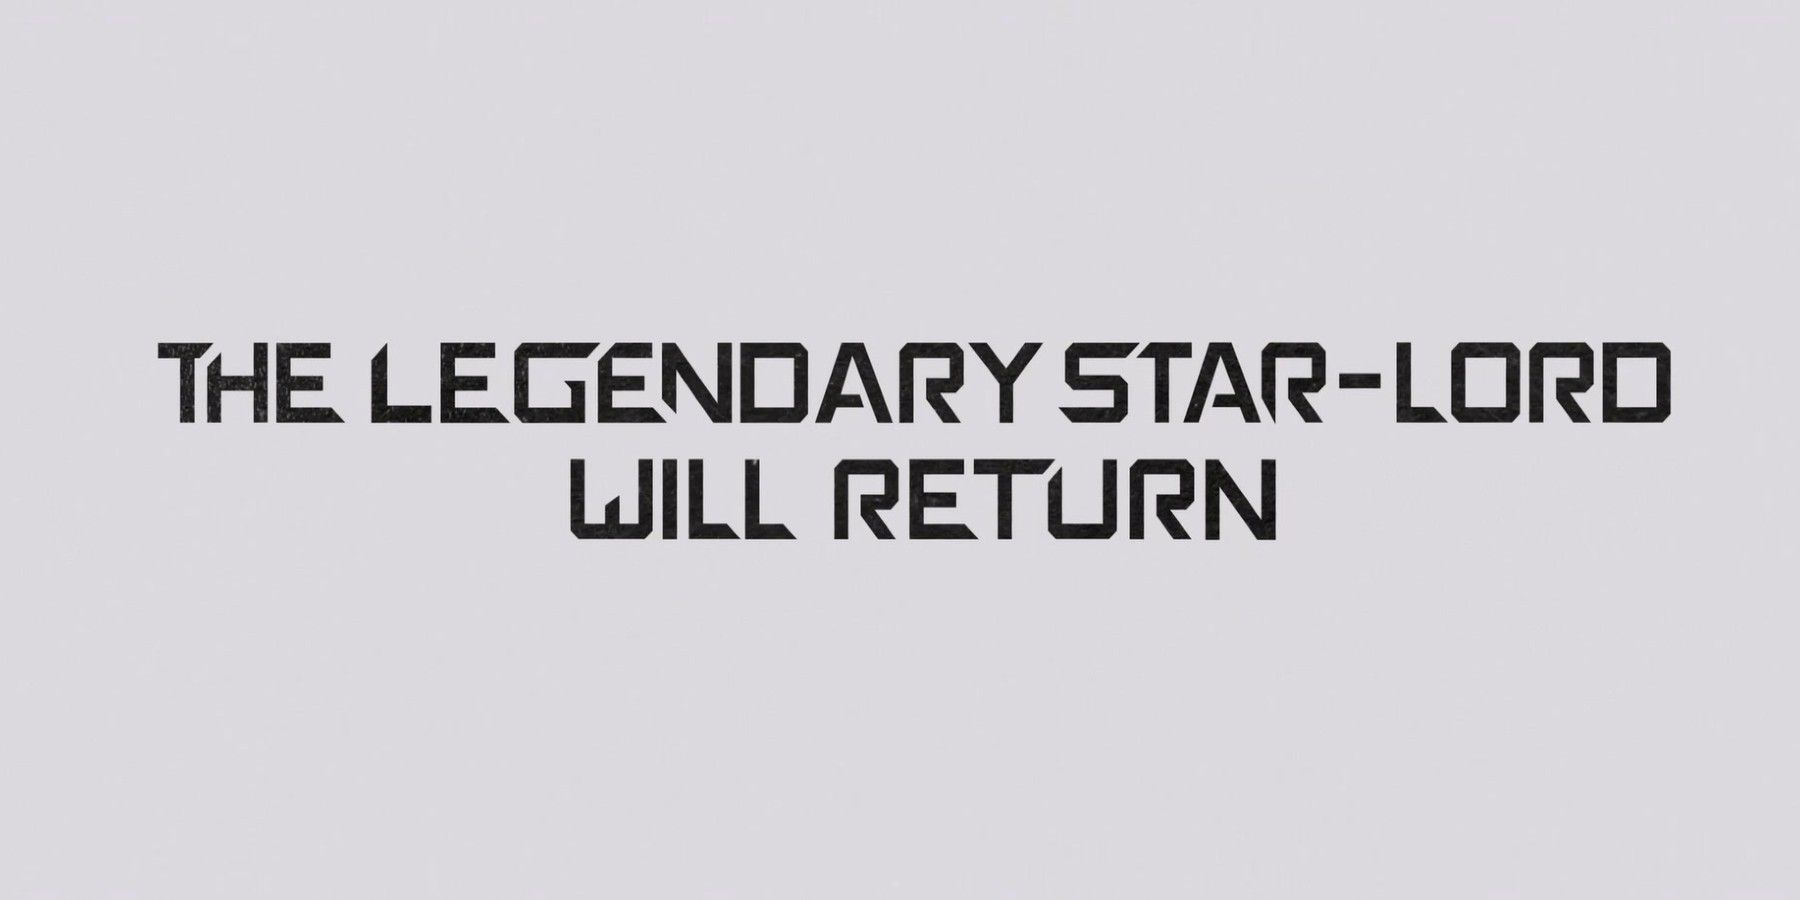 The Legendary Star-Lord Will Return post-credits sign on Guardians of The Galaxy Vol. 3